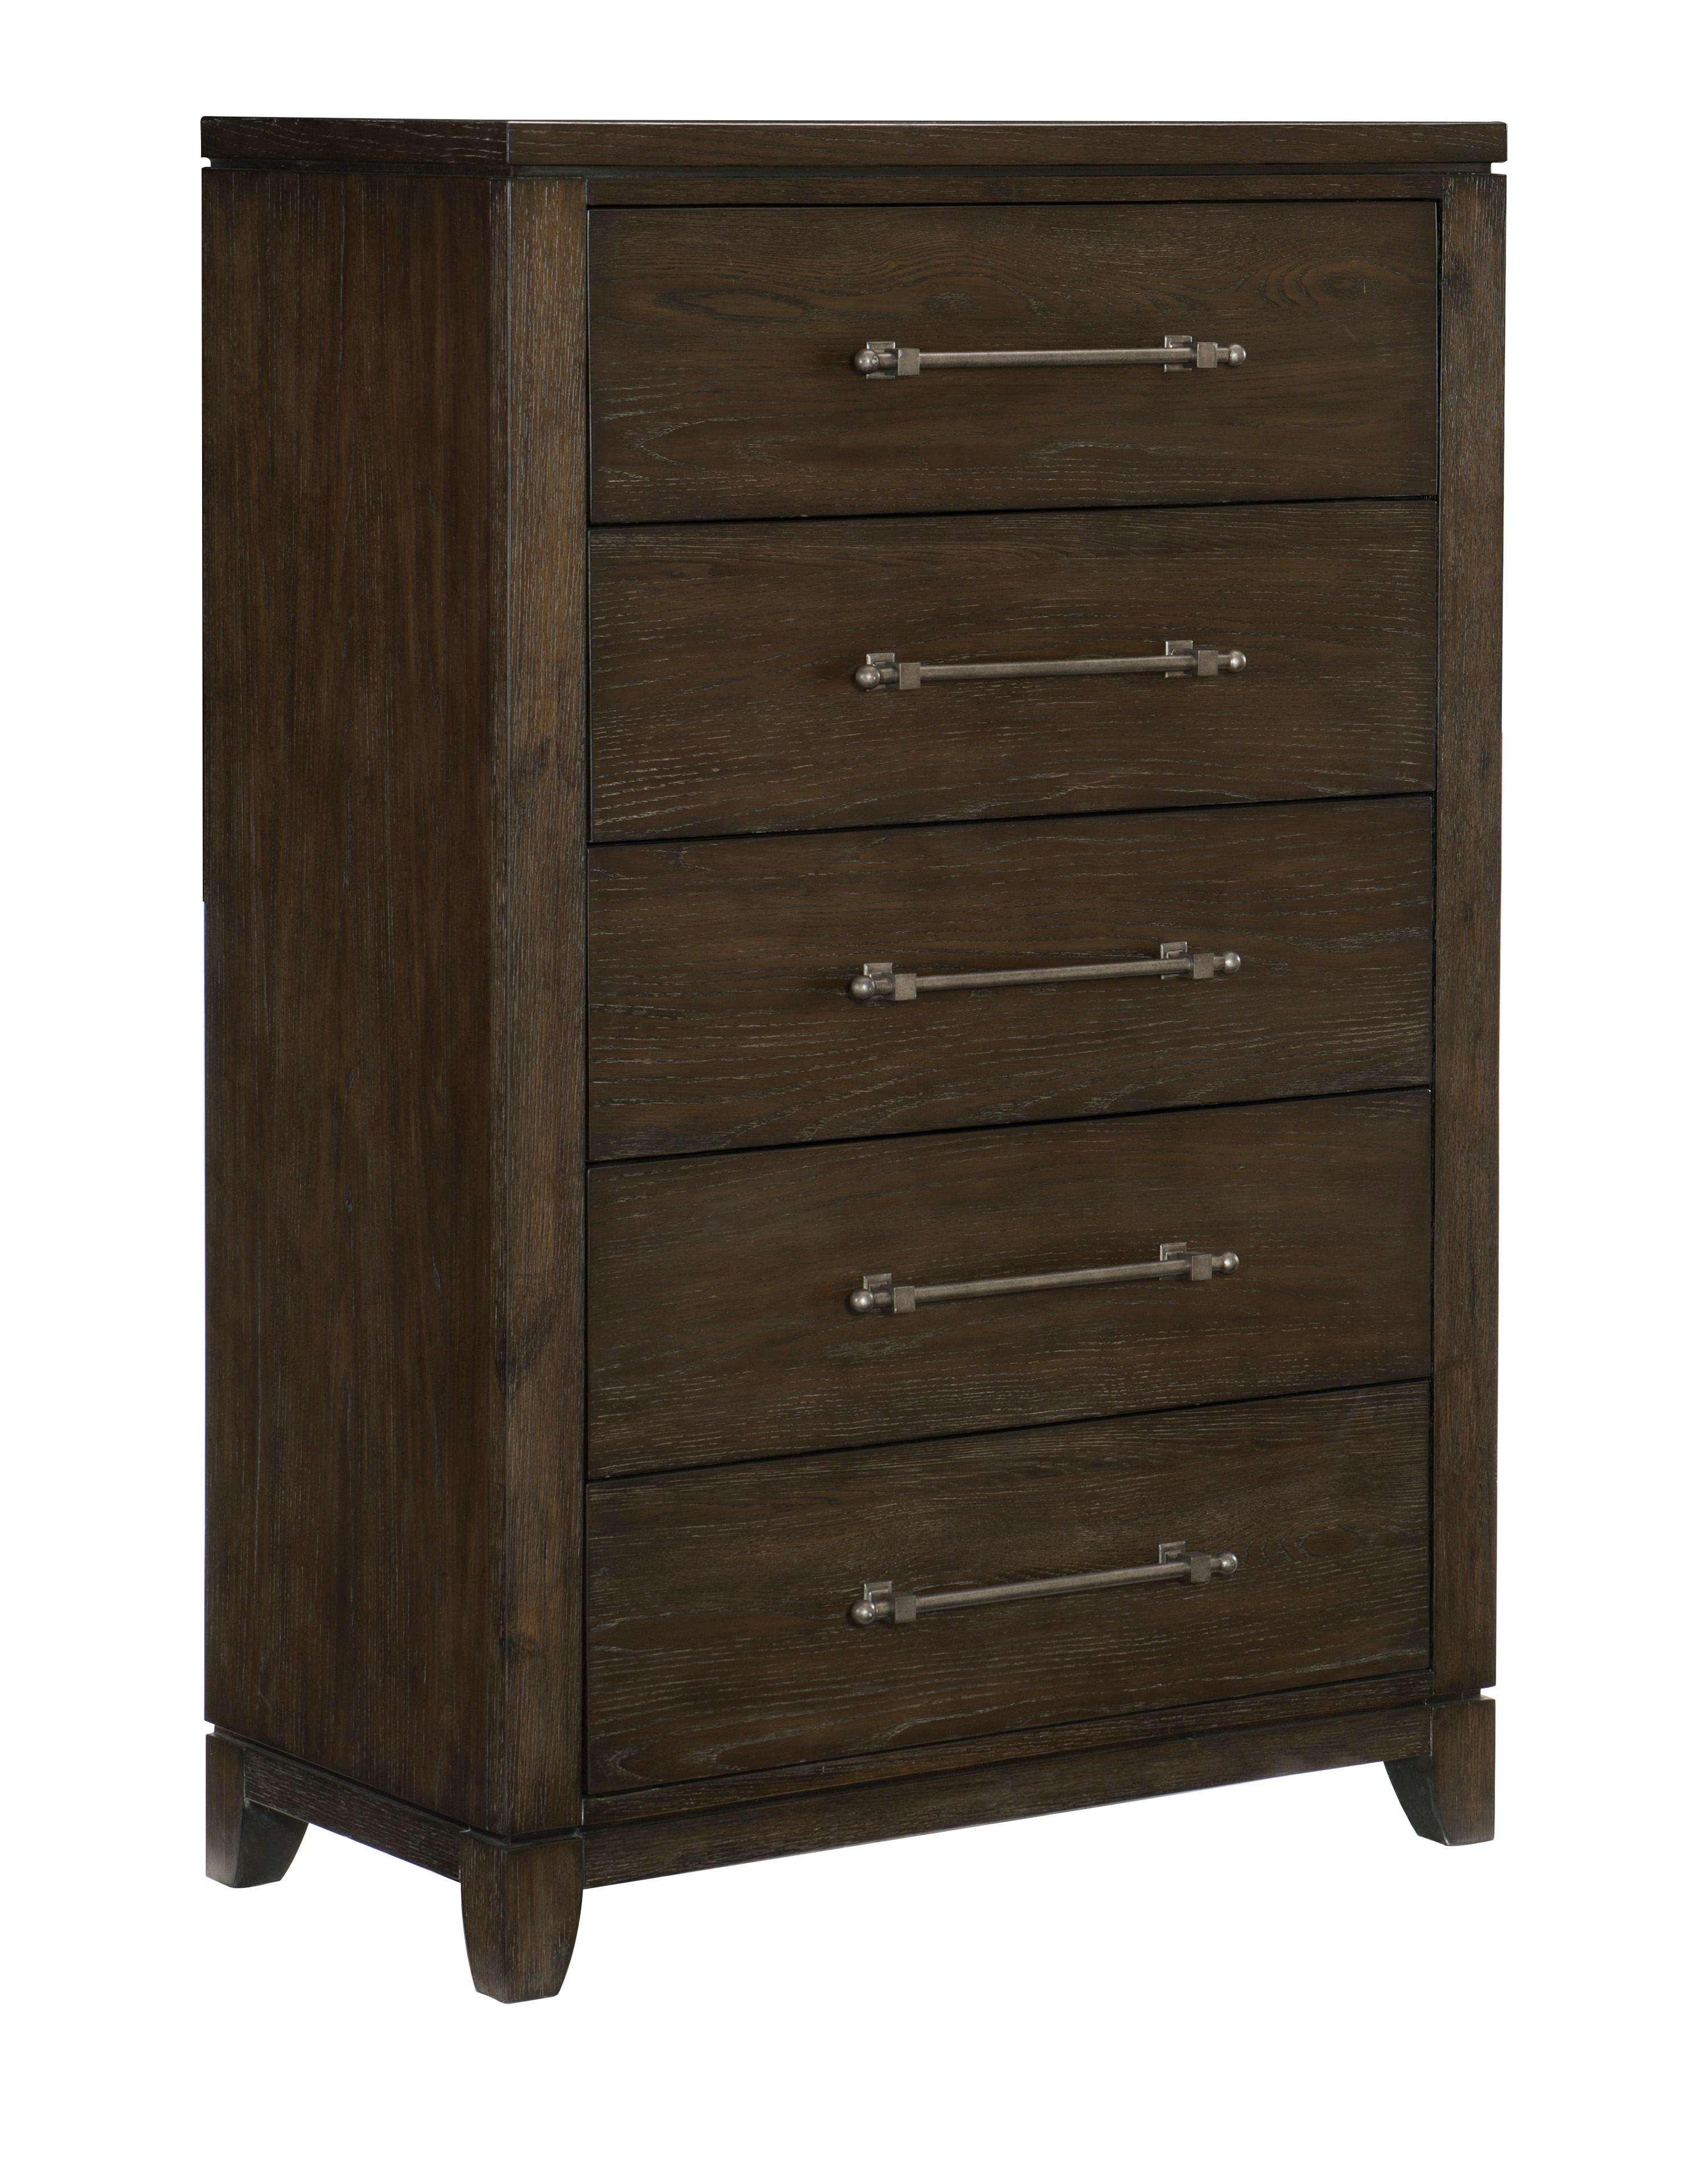 Contemporary Chest 1669-9 Griggs 1669-9 in Dark Brown 